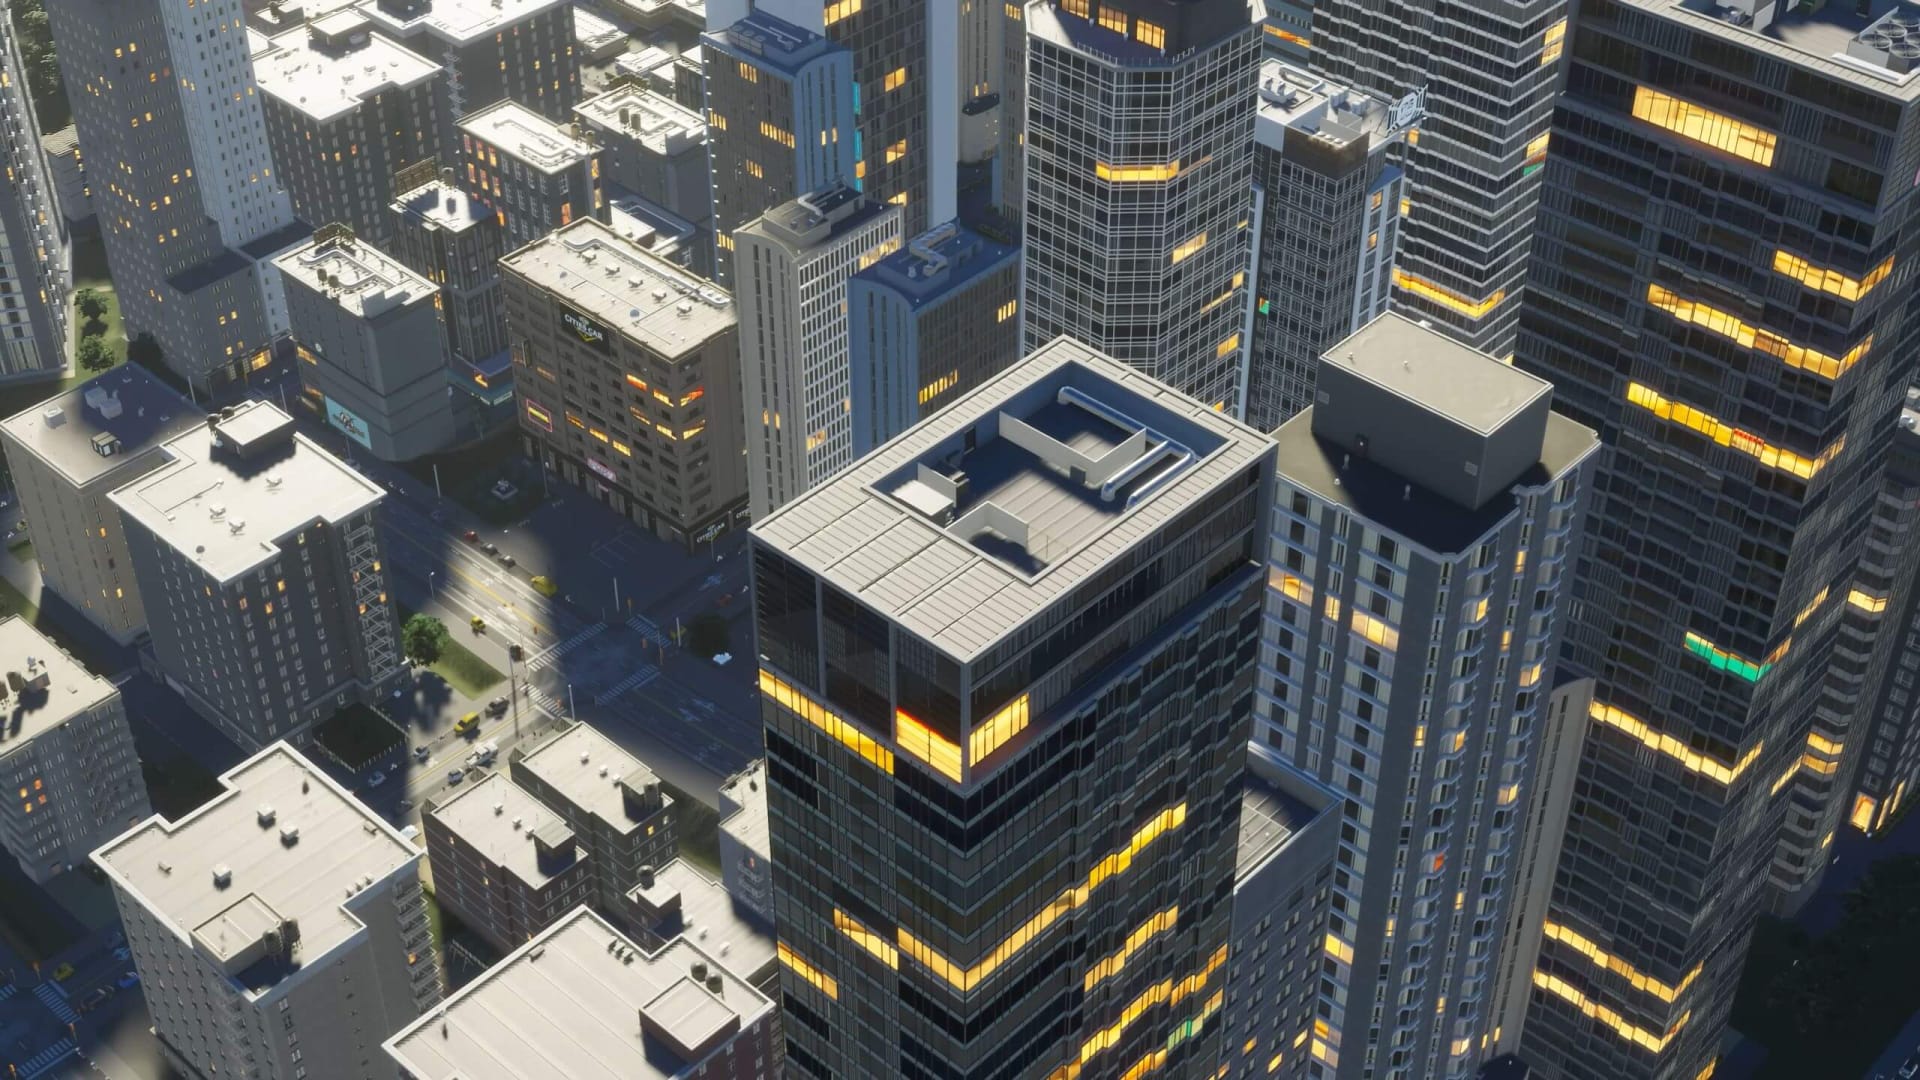 A cityscape full of densely-packed skyscrapers in Cities: Skylines 2